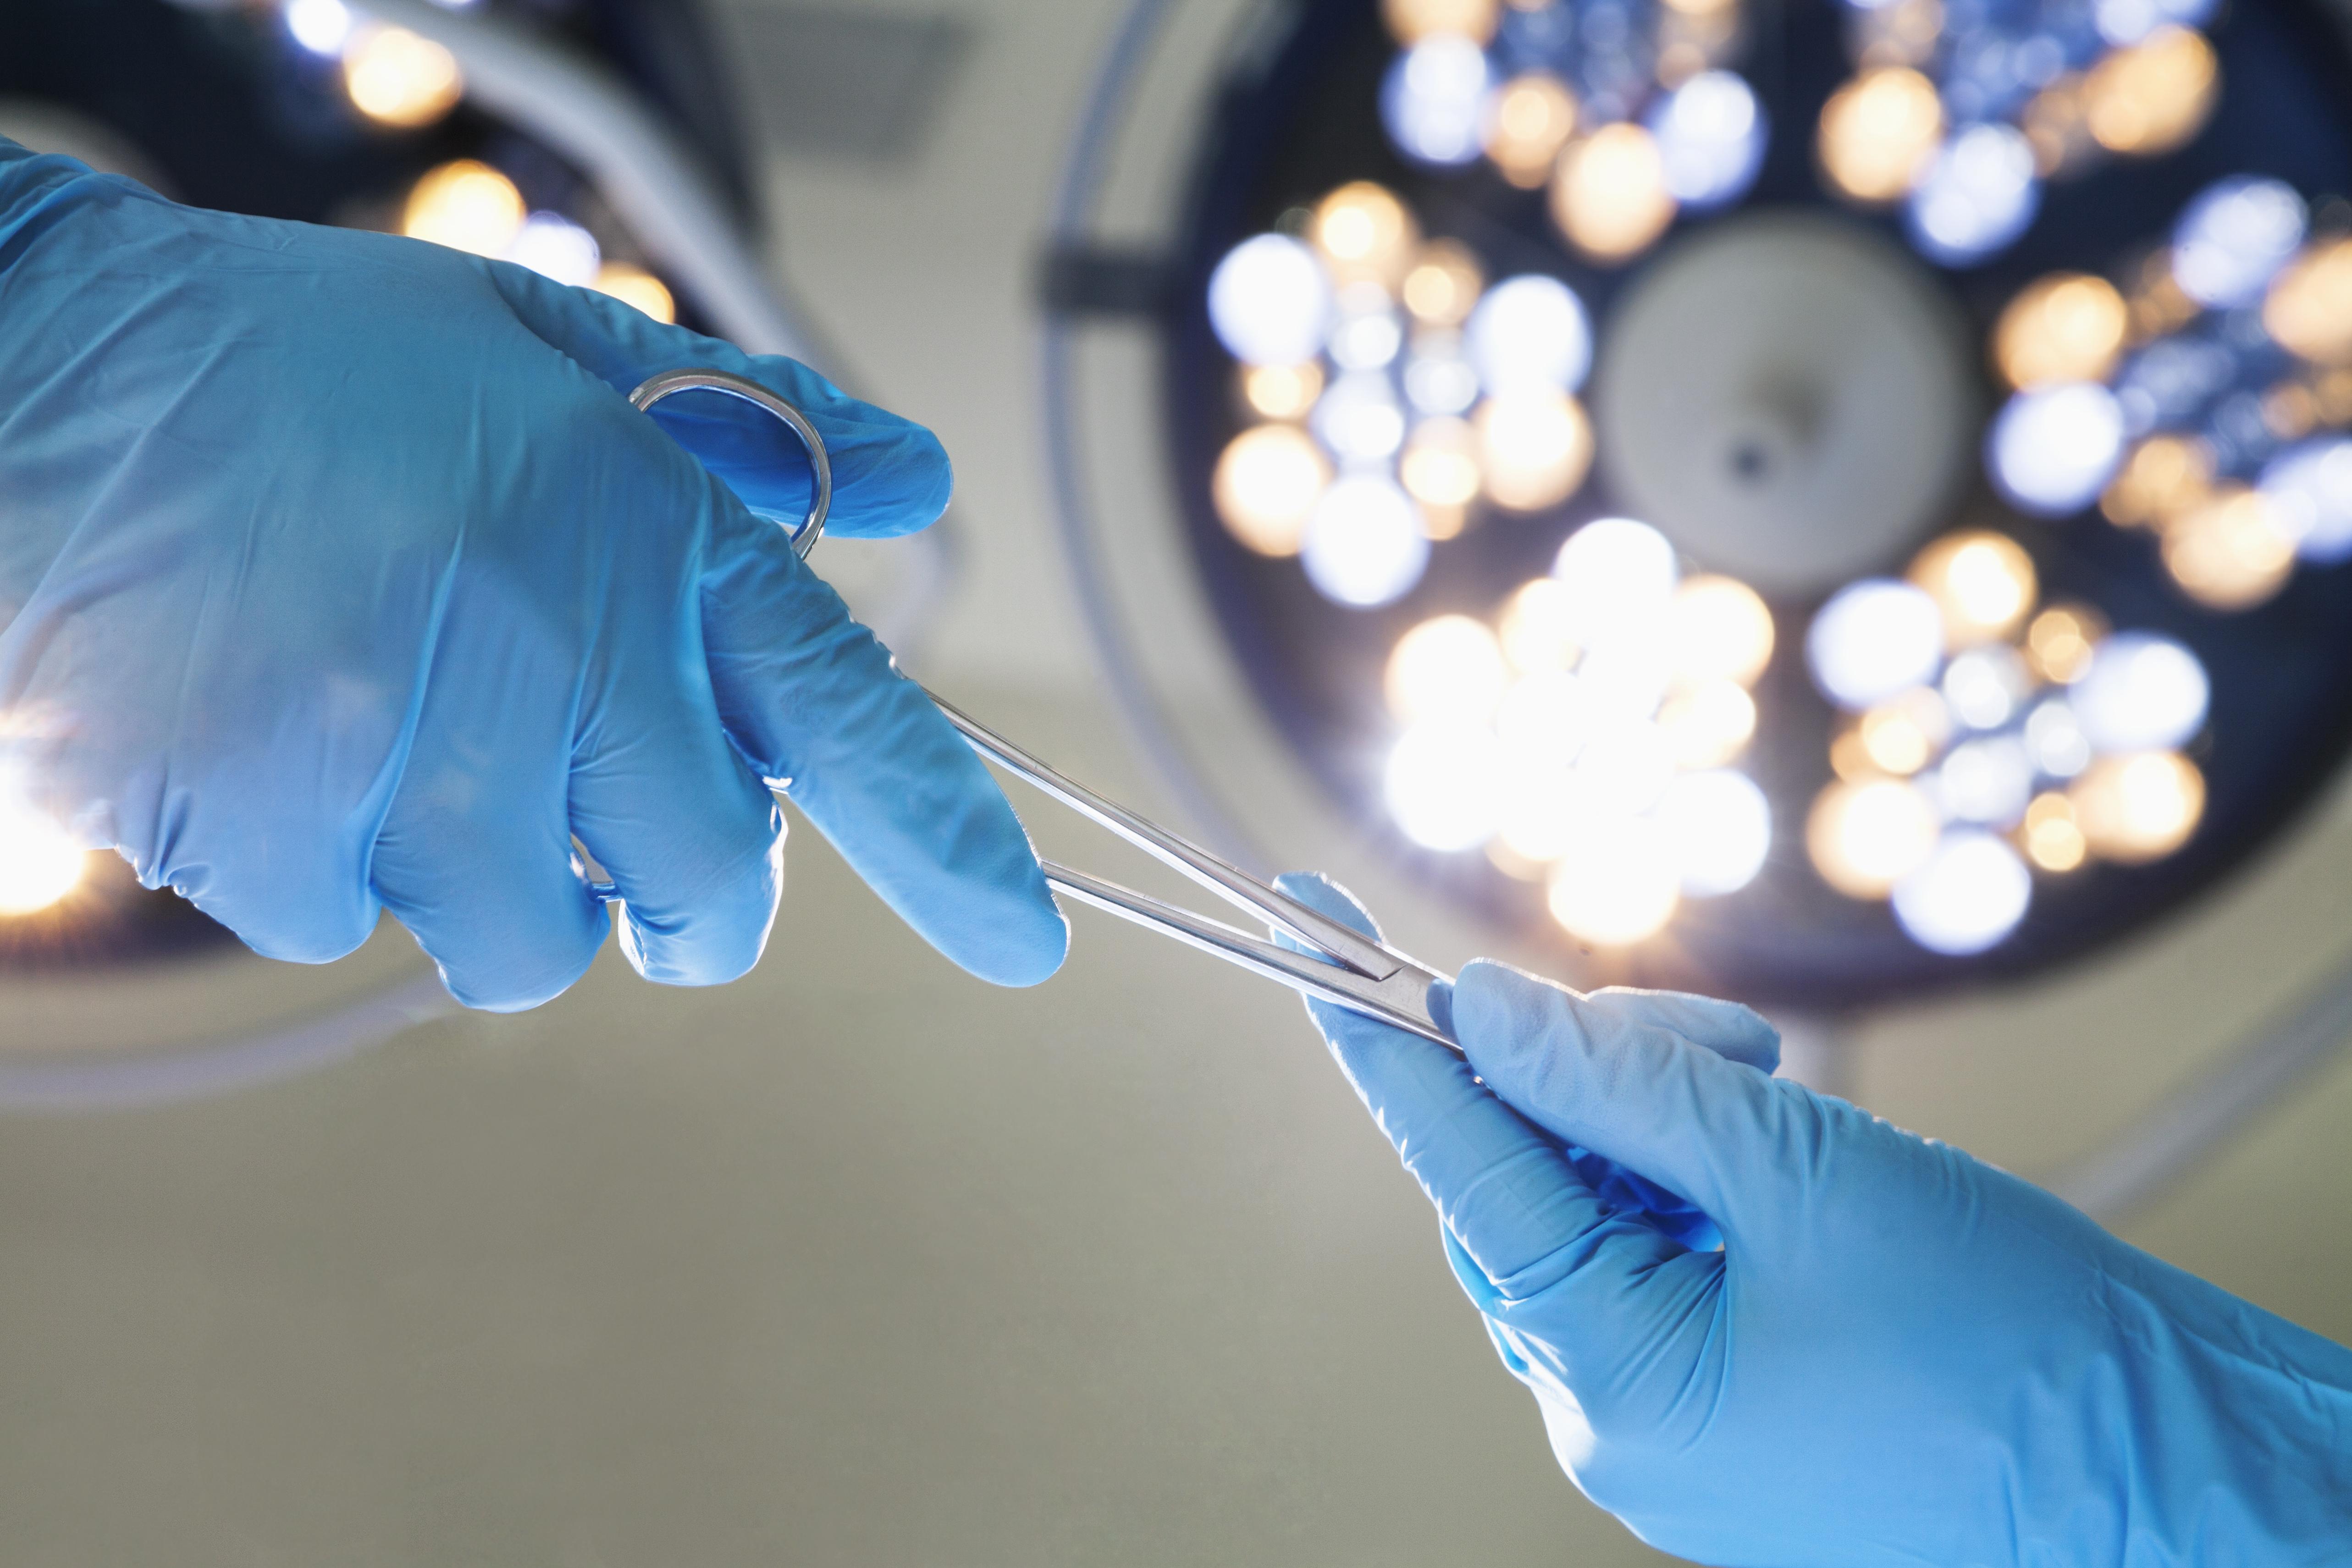 image of two gloved hands passing a surgical instrument under bright lights